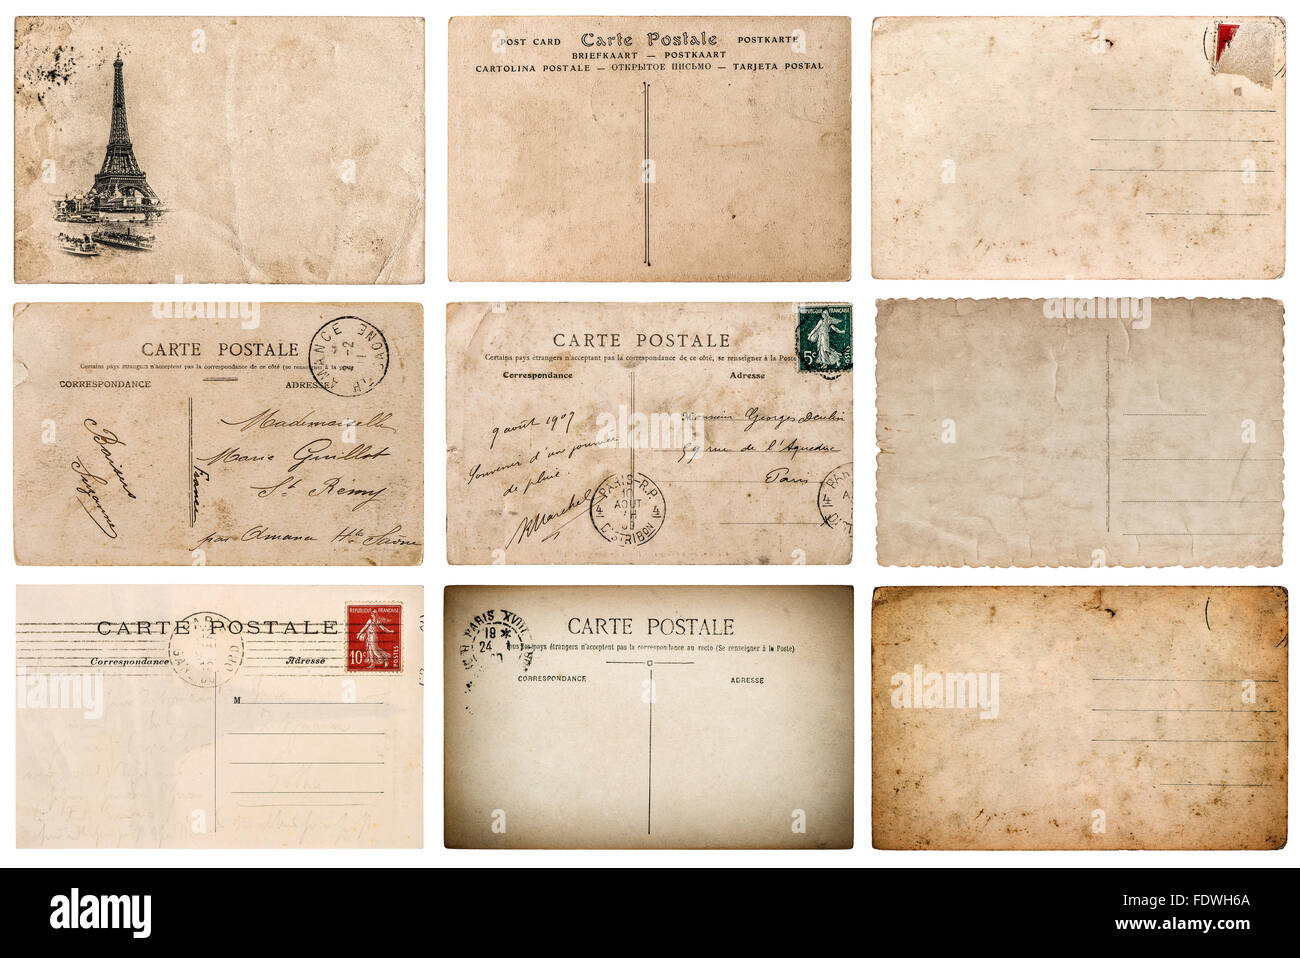 Antique french postcard with stamp from Paris. Scrapbook elements Stock Photo